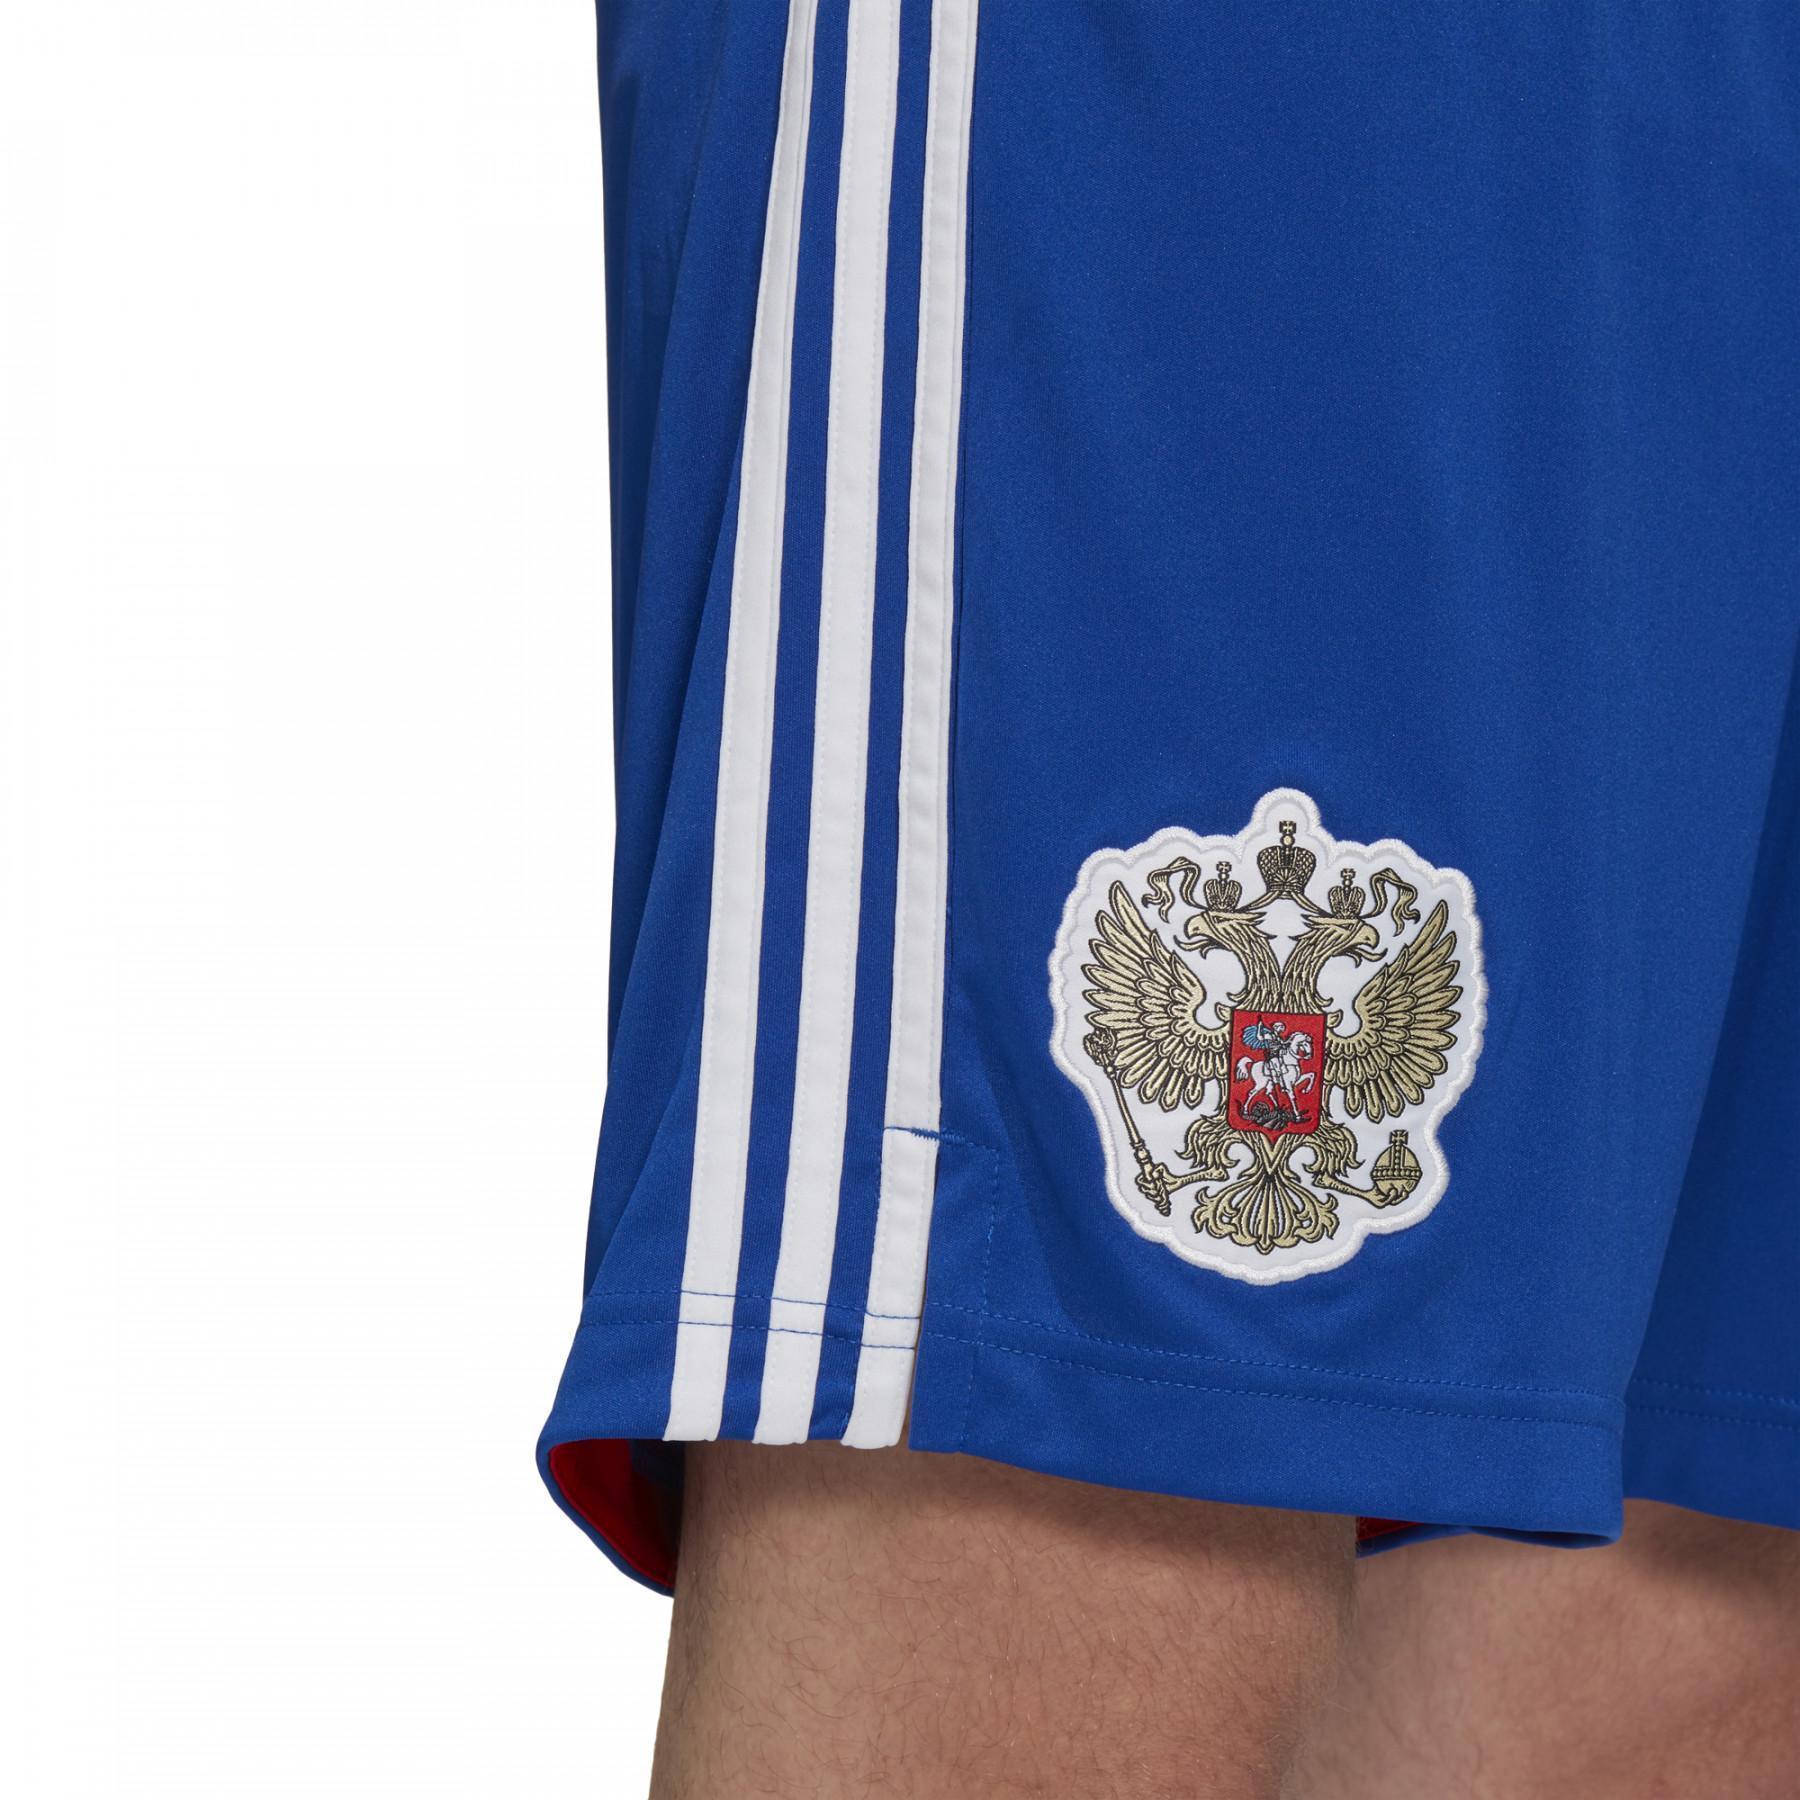 Outdoor shorts russia